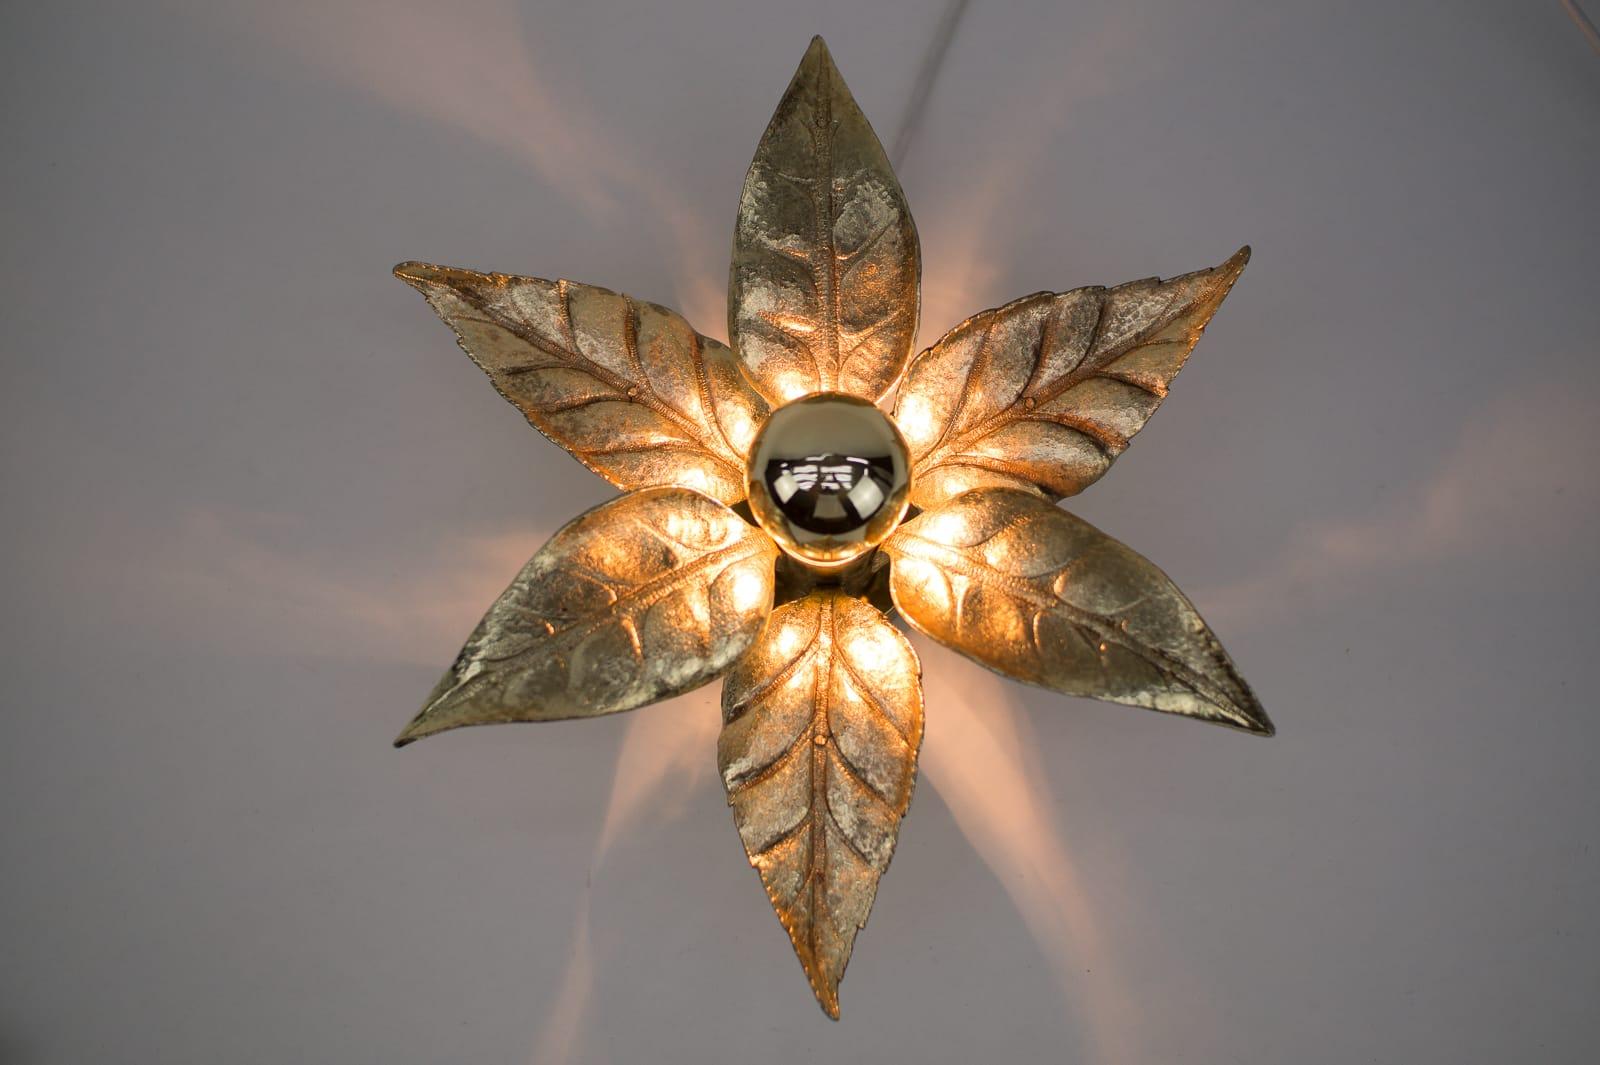 A gold wall sconce or wall light by Belgian designer Willy Daro for lighting manufacturer Massive. It has a wonderful naturalistic shape and is very decorative of the 1970s era.

The double lamp is 75cm long and 18cm depth, with bulb 22cm.

We have